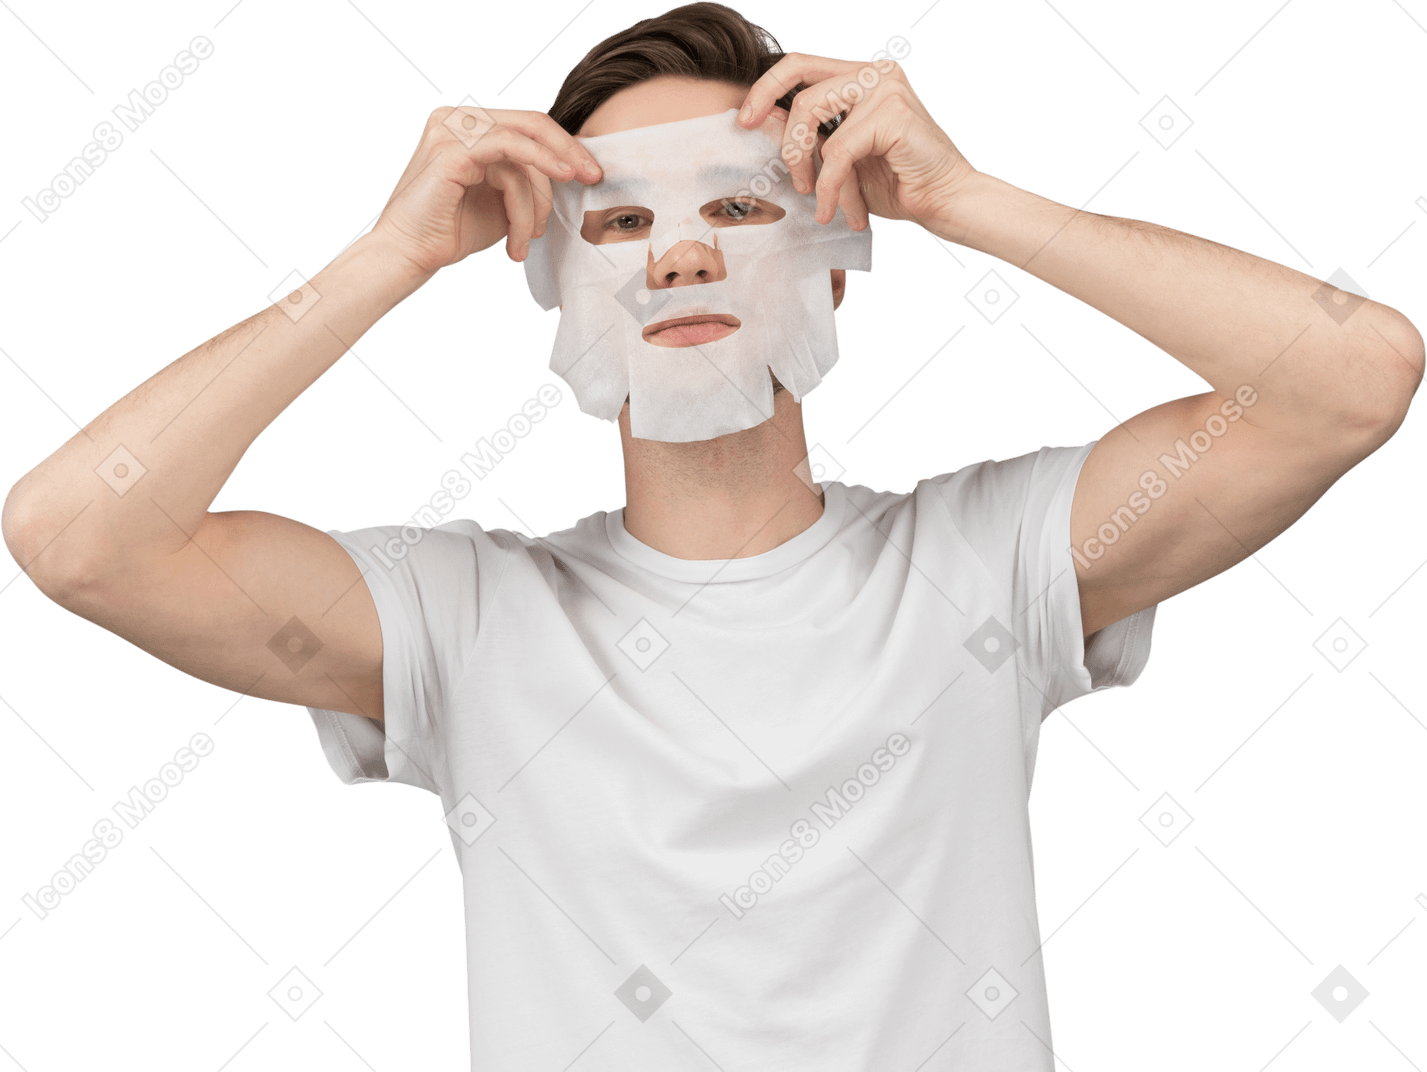 Front view of a young man putting on facial mask